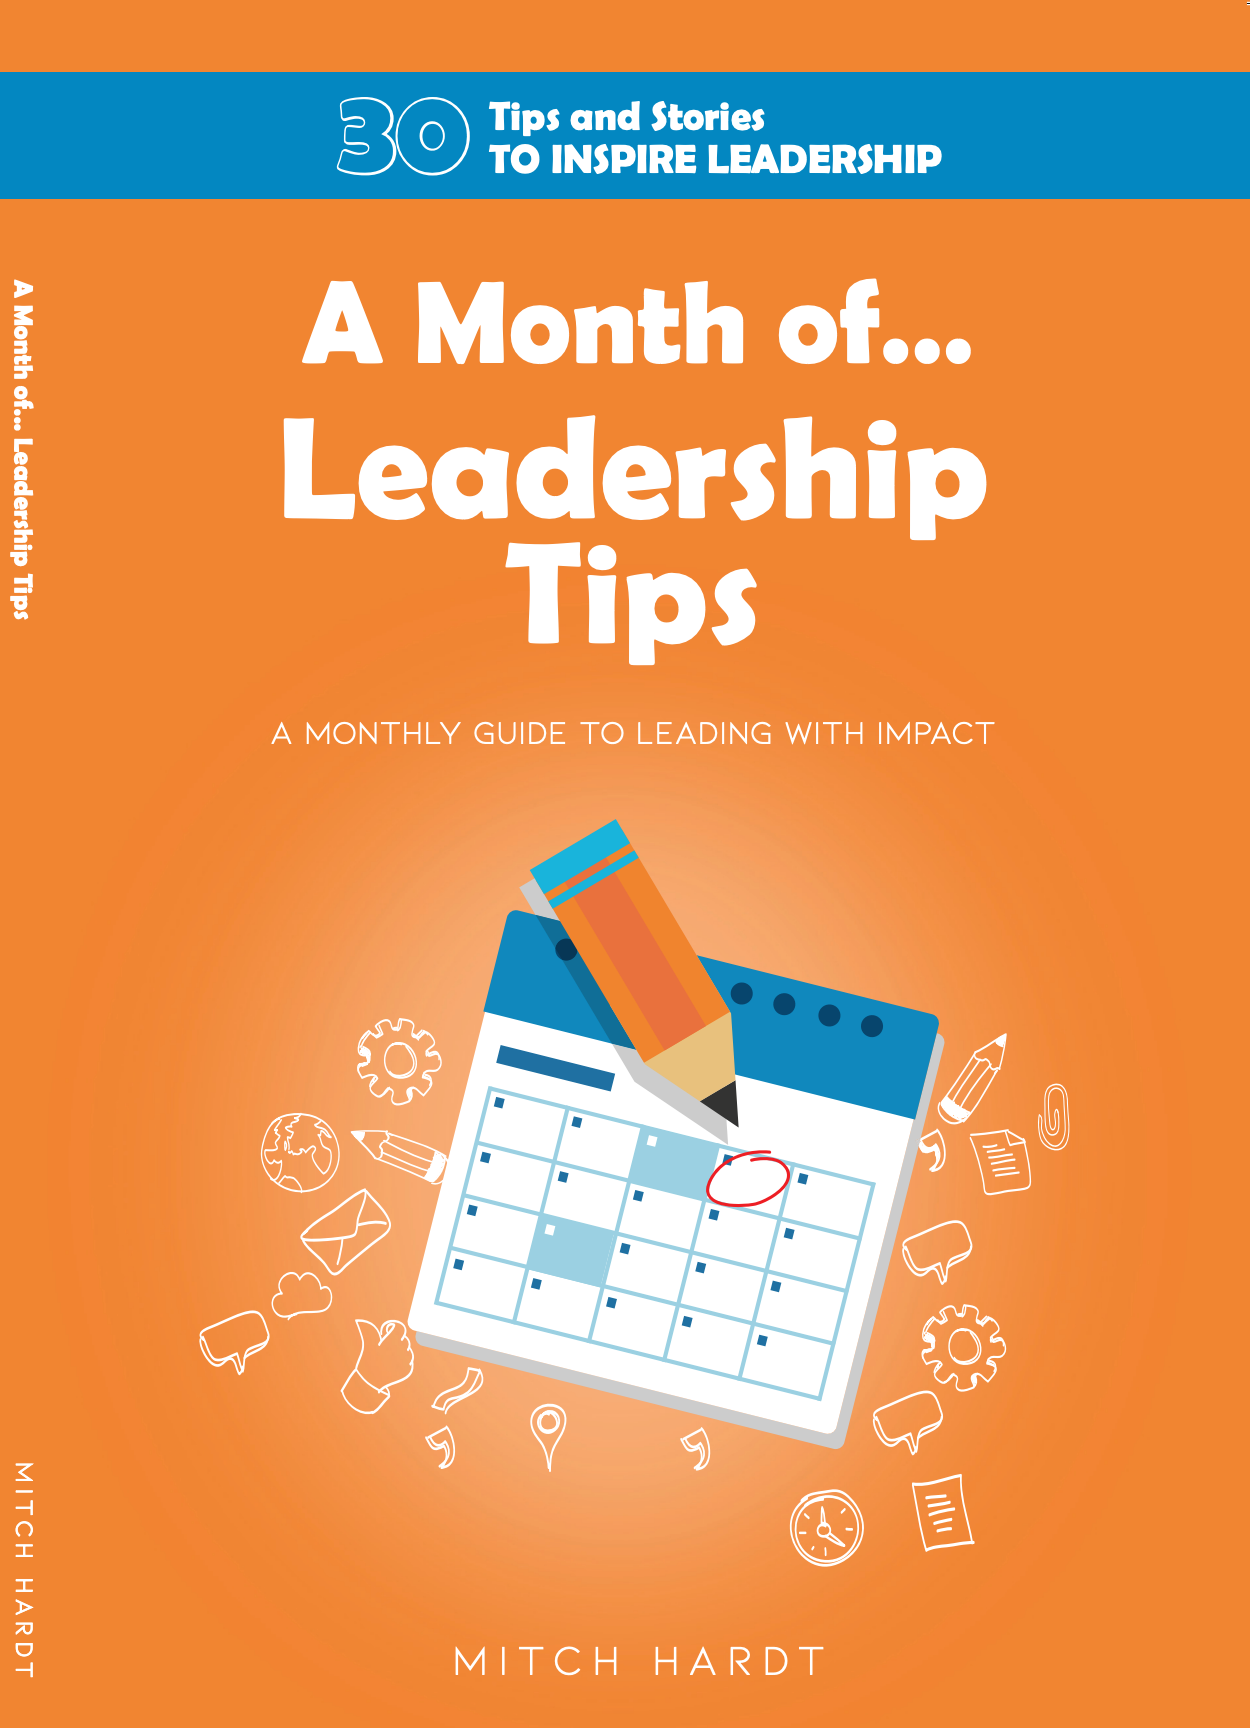 A Month of Leadership Tips